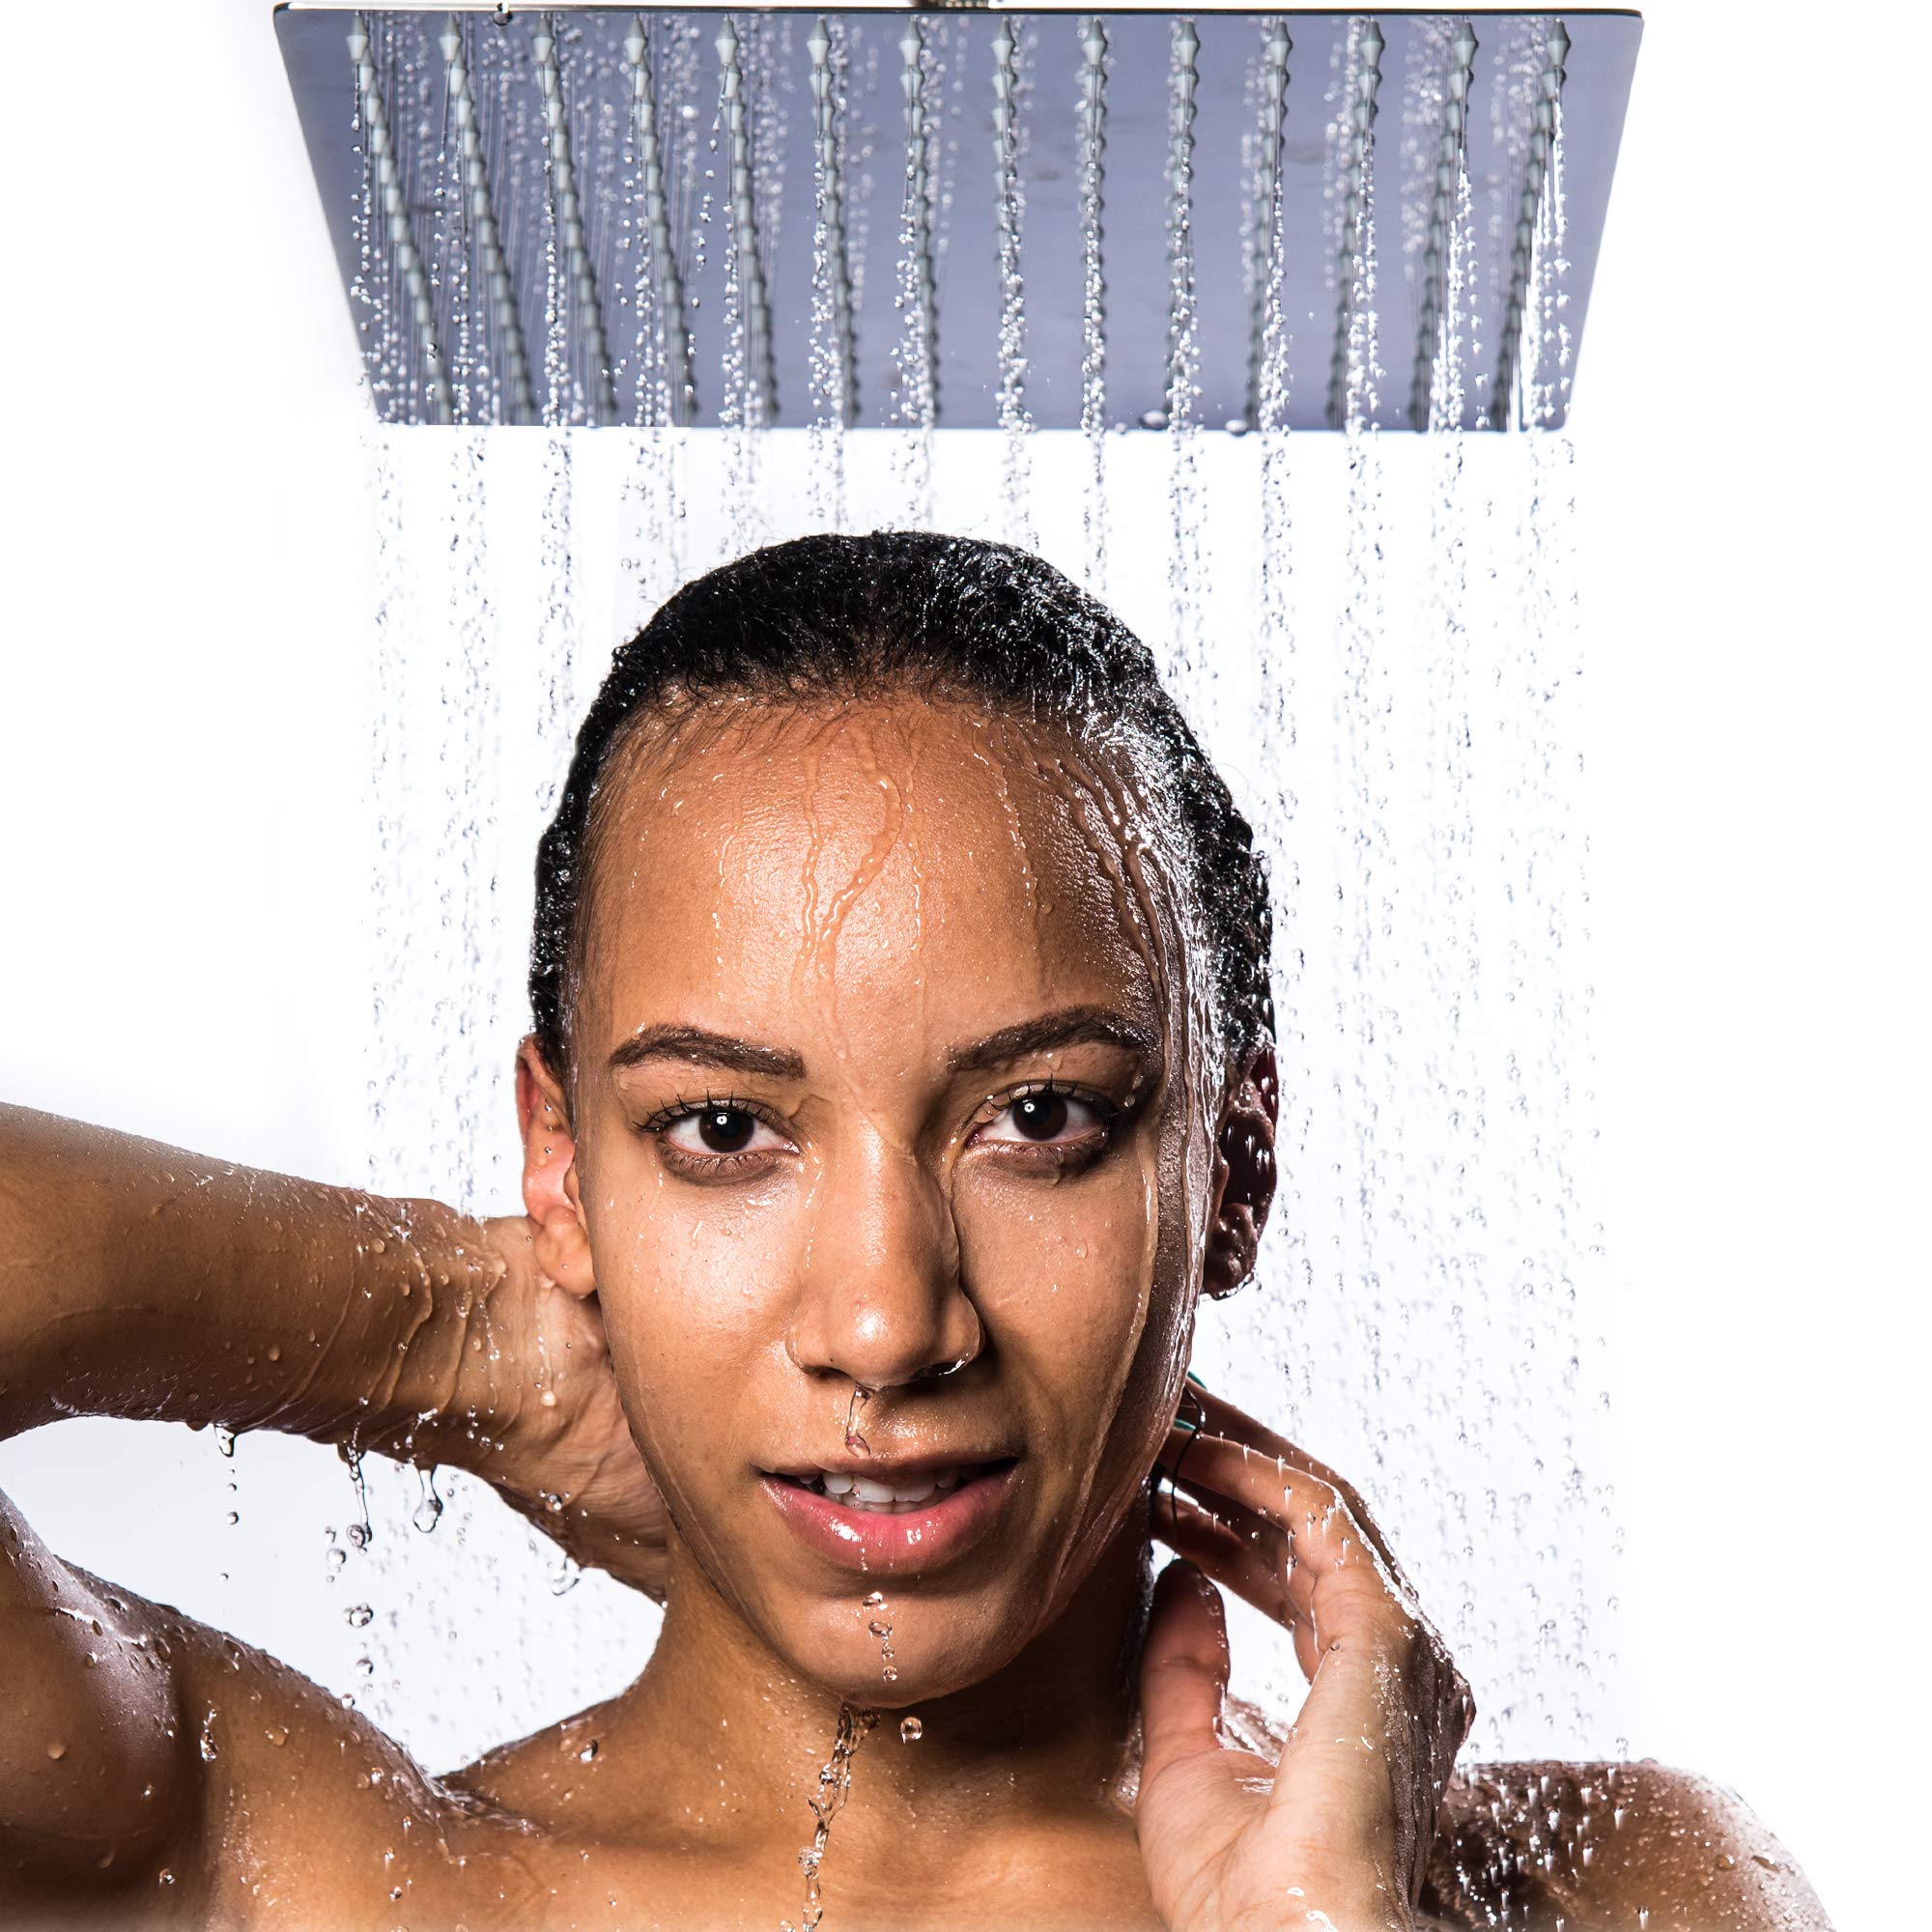 Book Cover 12 inch Square Rain Shower Head EVEN LOW WATER PRESSURE Rainfall Shower Head - Modern Waterfall Fixed Showerhead Easy Clean and Install Made of Durable Ultra Thin Solid 304 Stainless Steel - No Arm